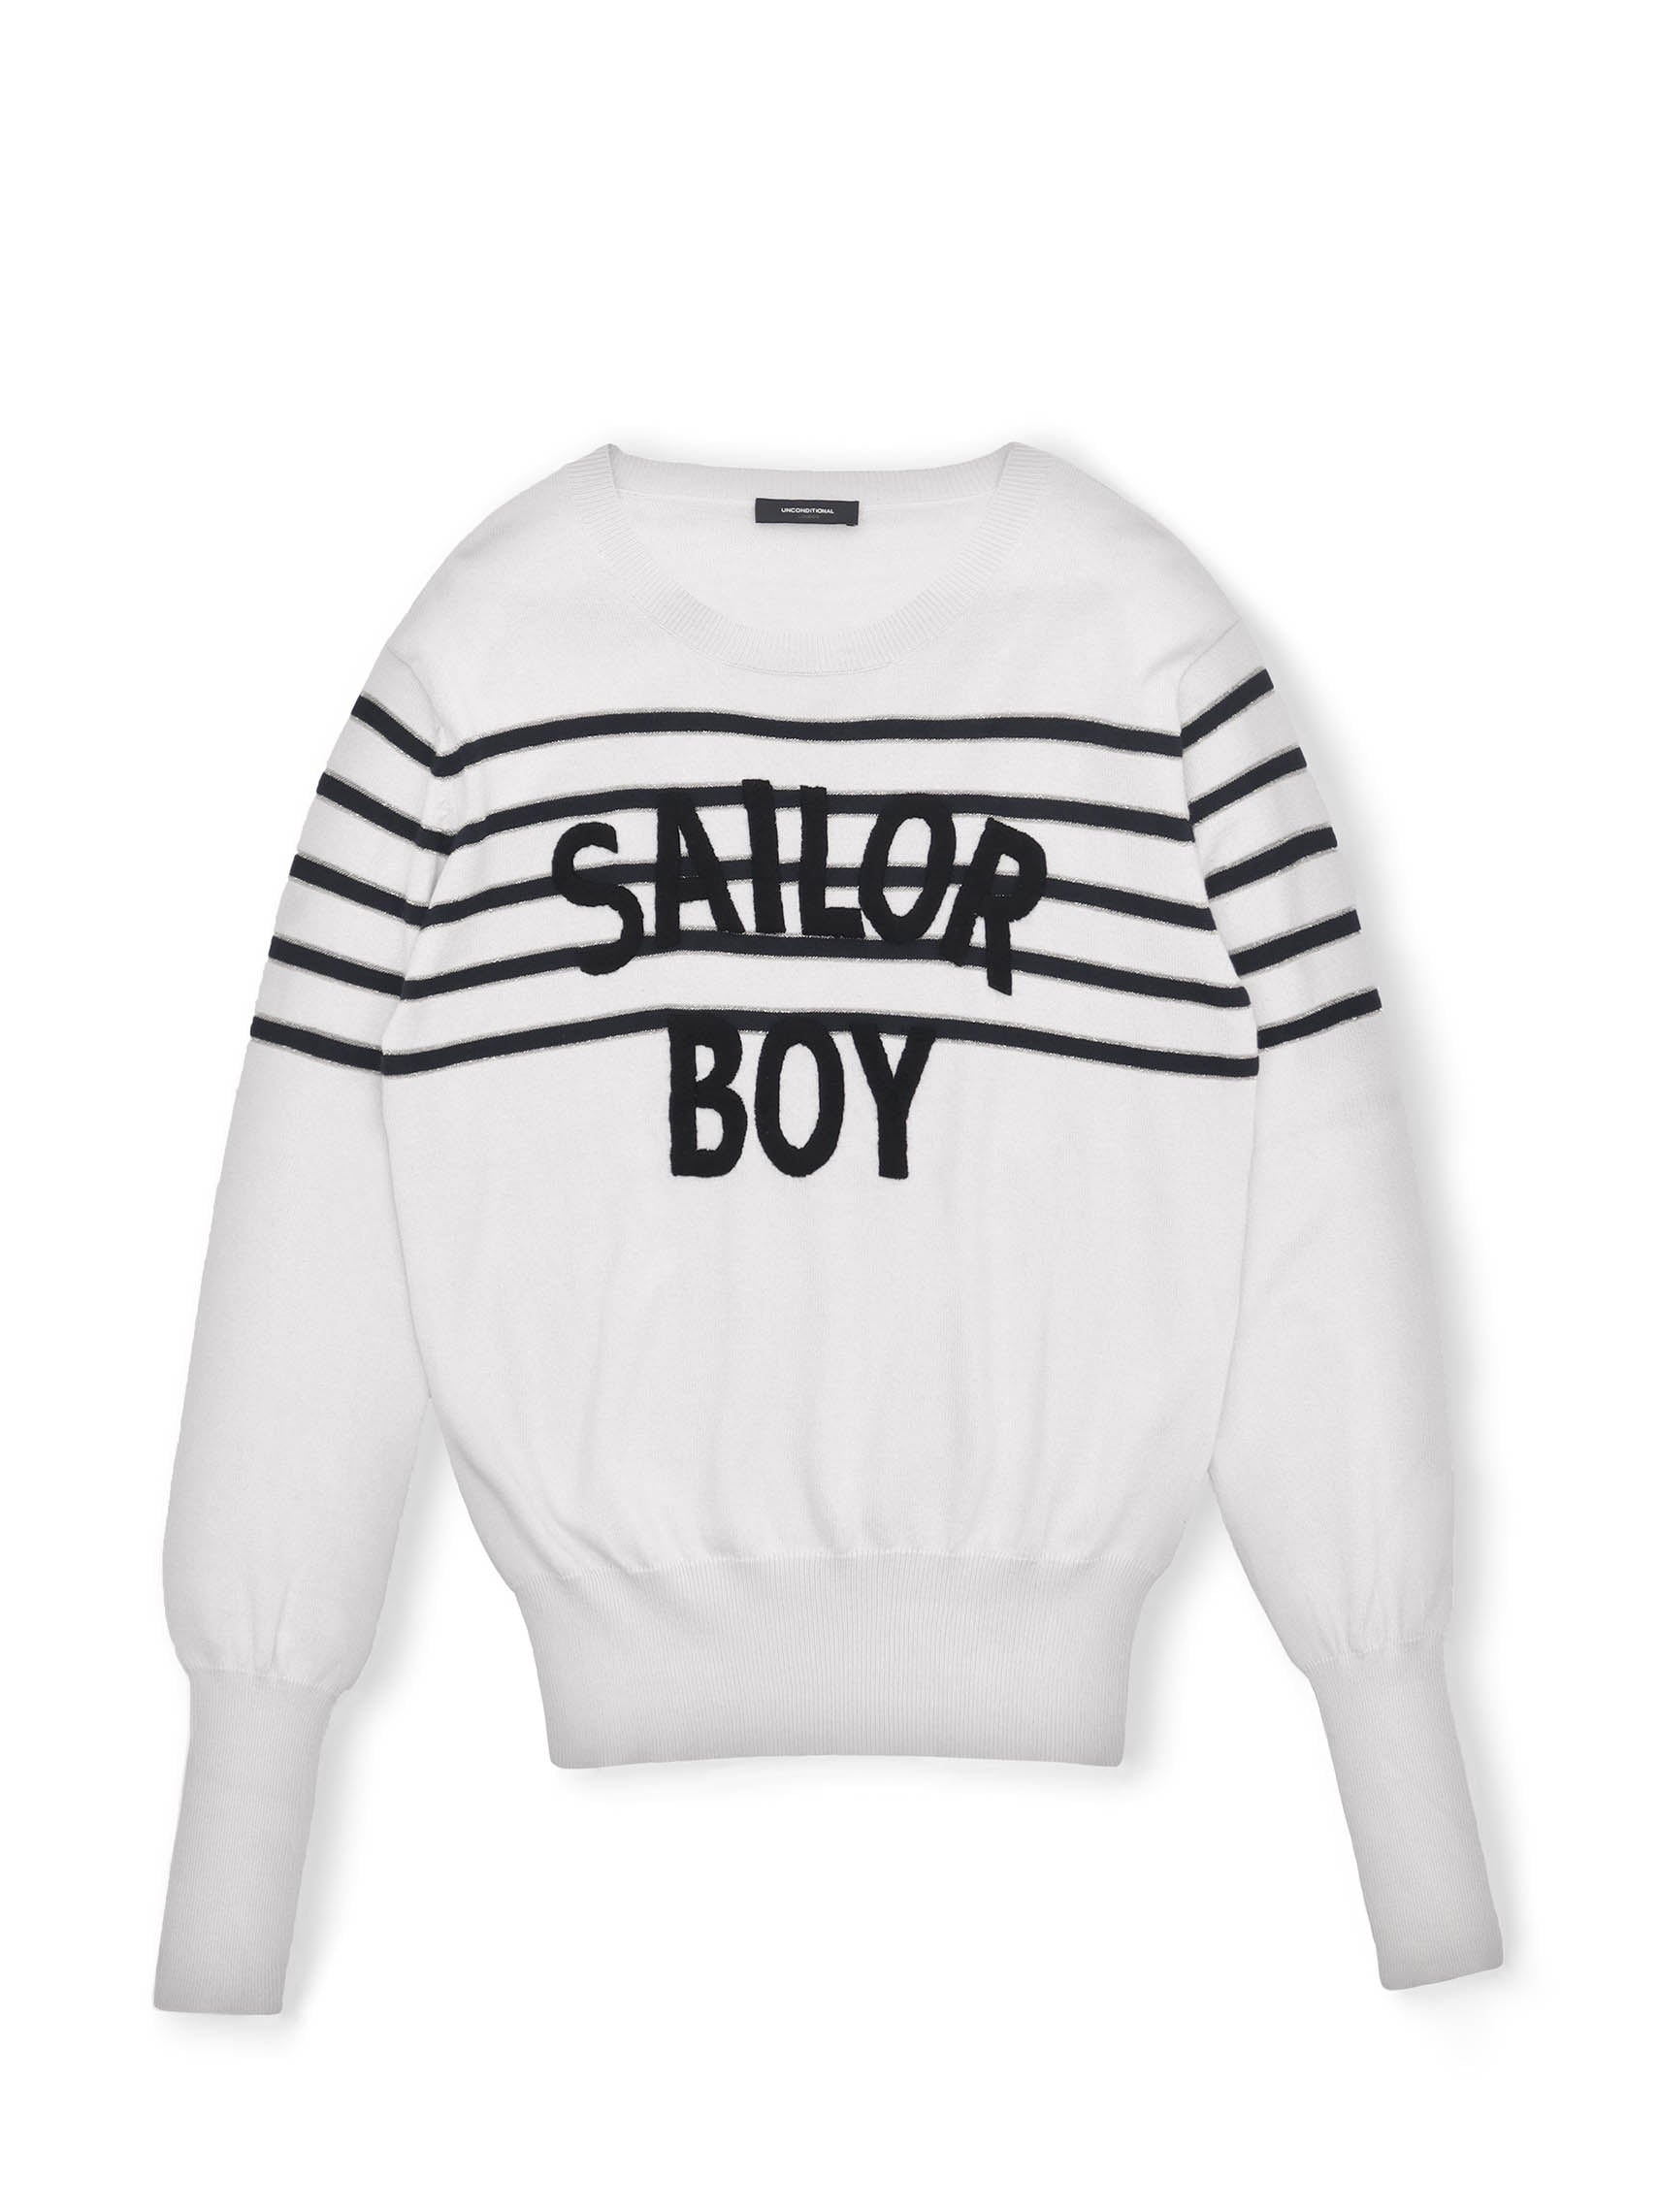 SAILOR BOY KNITTED JUMPER IN WHITE